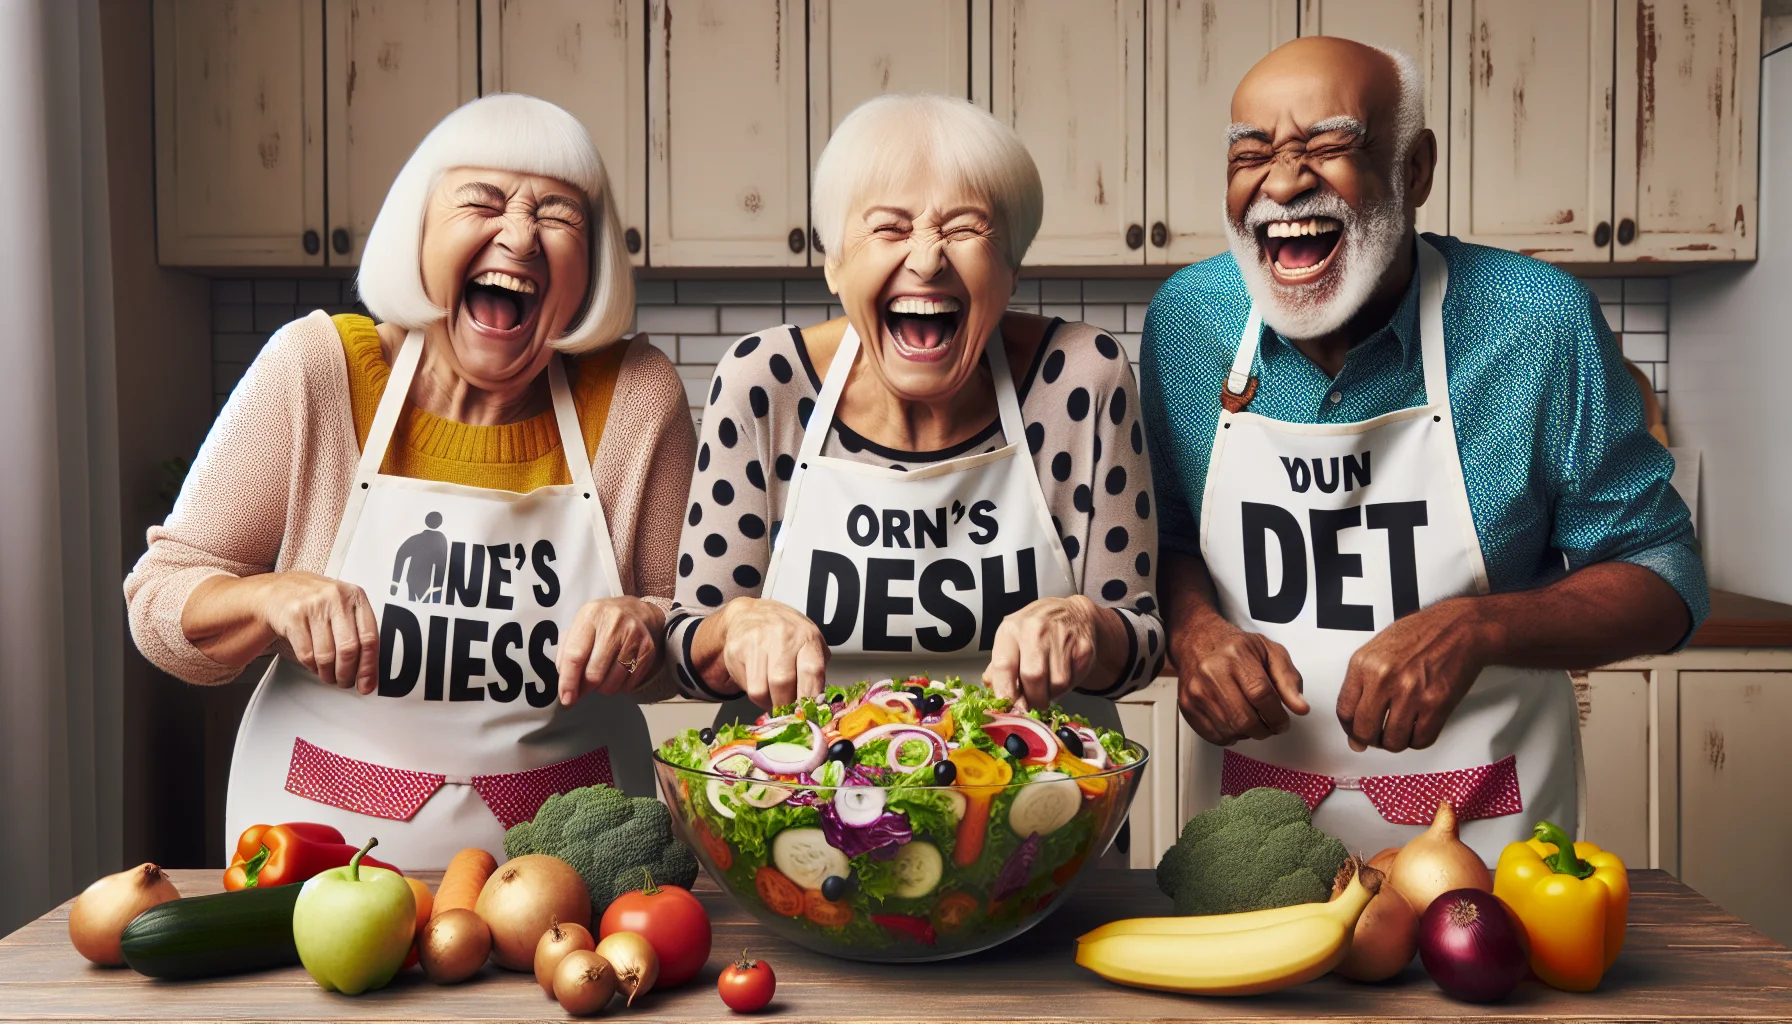 A humorous scene centred in a one-dish kitchen. There are three elderly individuals of diverse descent: a Caucasian woman, a Hispanic man, and a Black woman, all laughing heartily while preparing a massive, colorful salad. Each is wearing fun, novelty aprons with well-known diet slogans twisted into humorous puns. Spread across the small kitchen table are all sorts of fresh, vibrant vegetables and fruits. Their grinning expressions and playful energy create a feeling of light-heartedness about their pursuit of health and vitality.